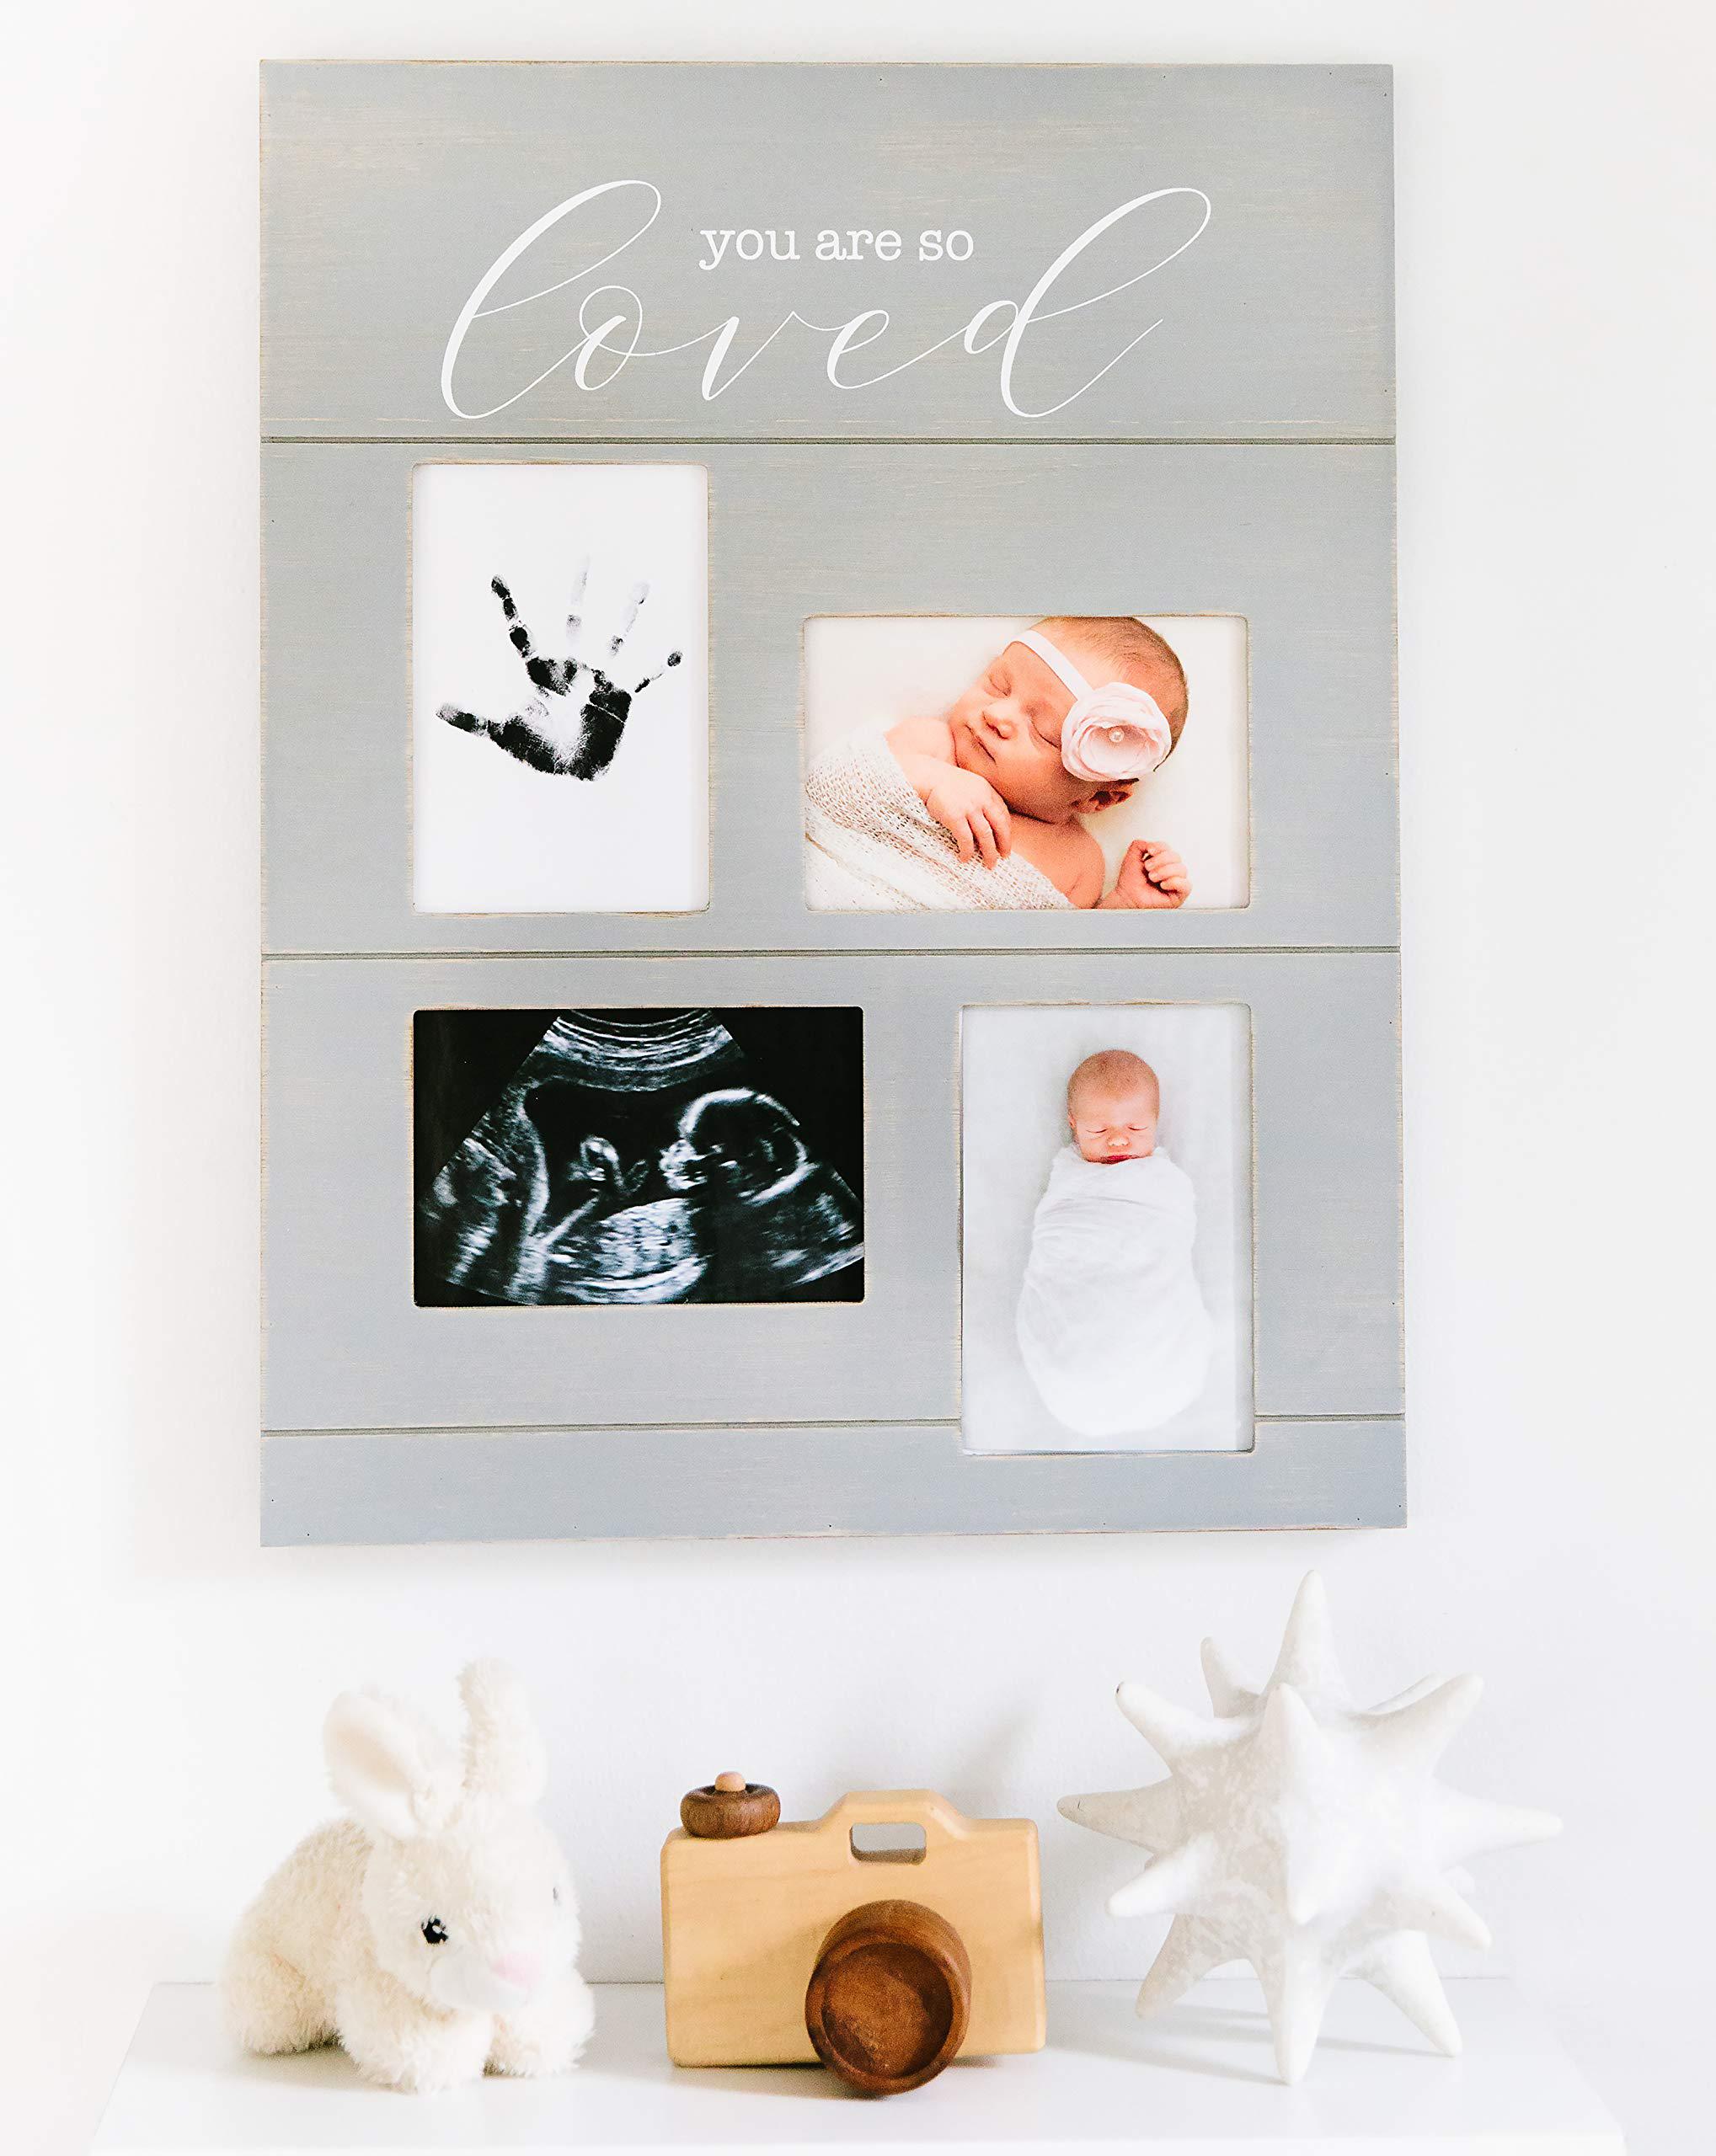 pearhead so loved collage photo frame and clean-touch ink pad, baby handprint or footprint keepsake, sonogram picture frame, 